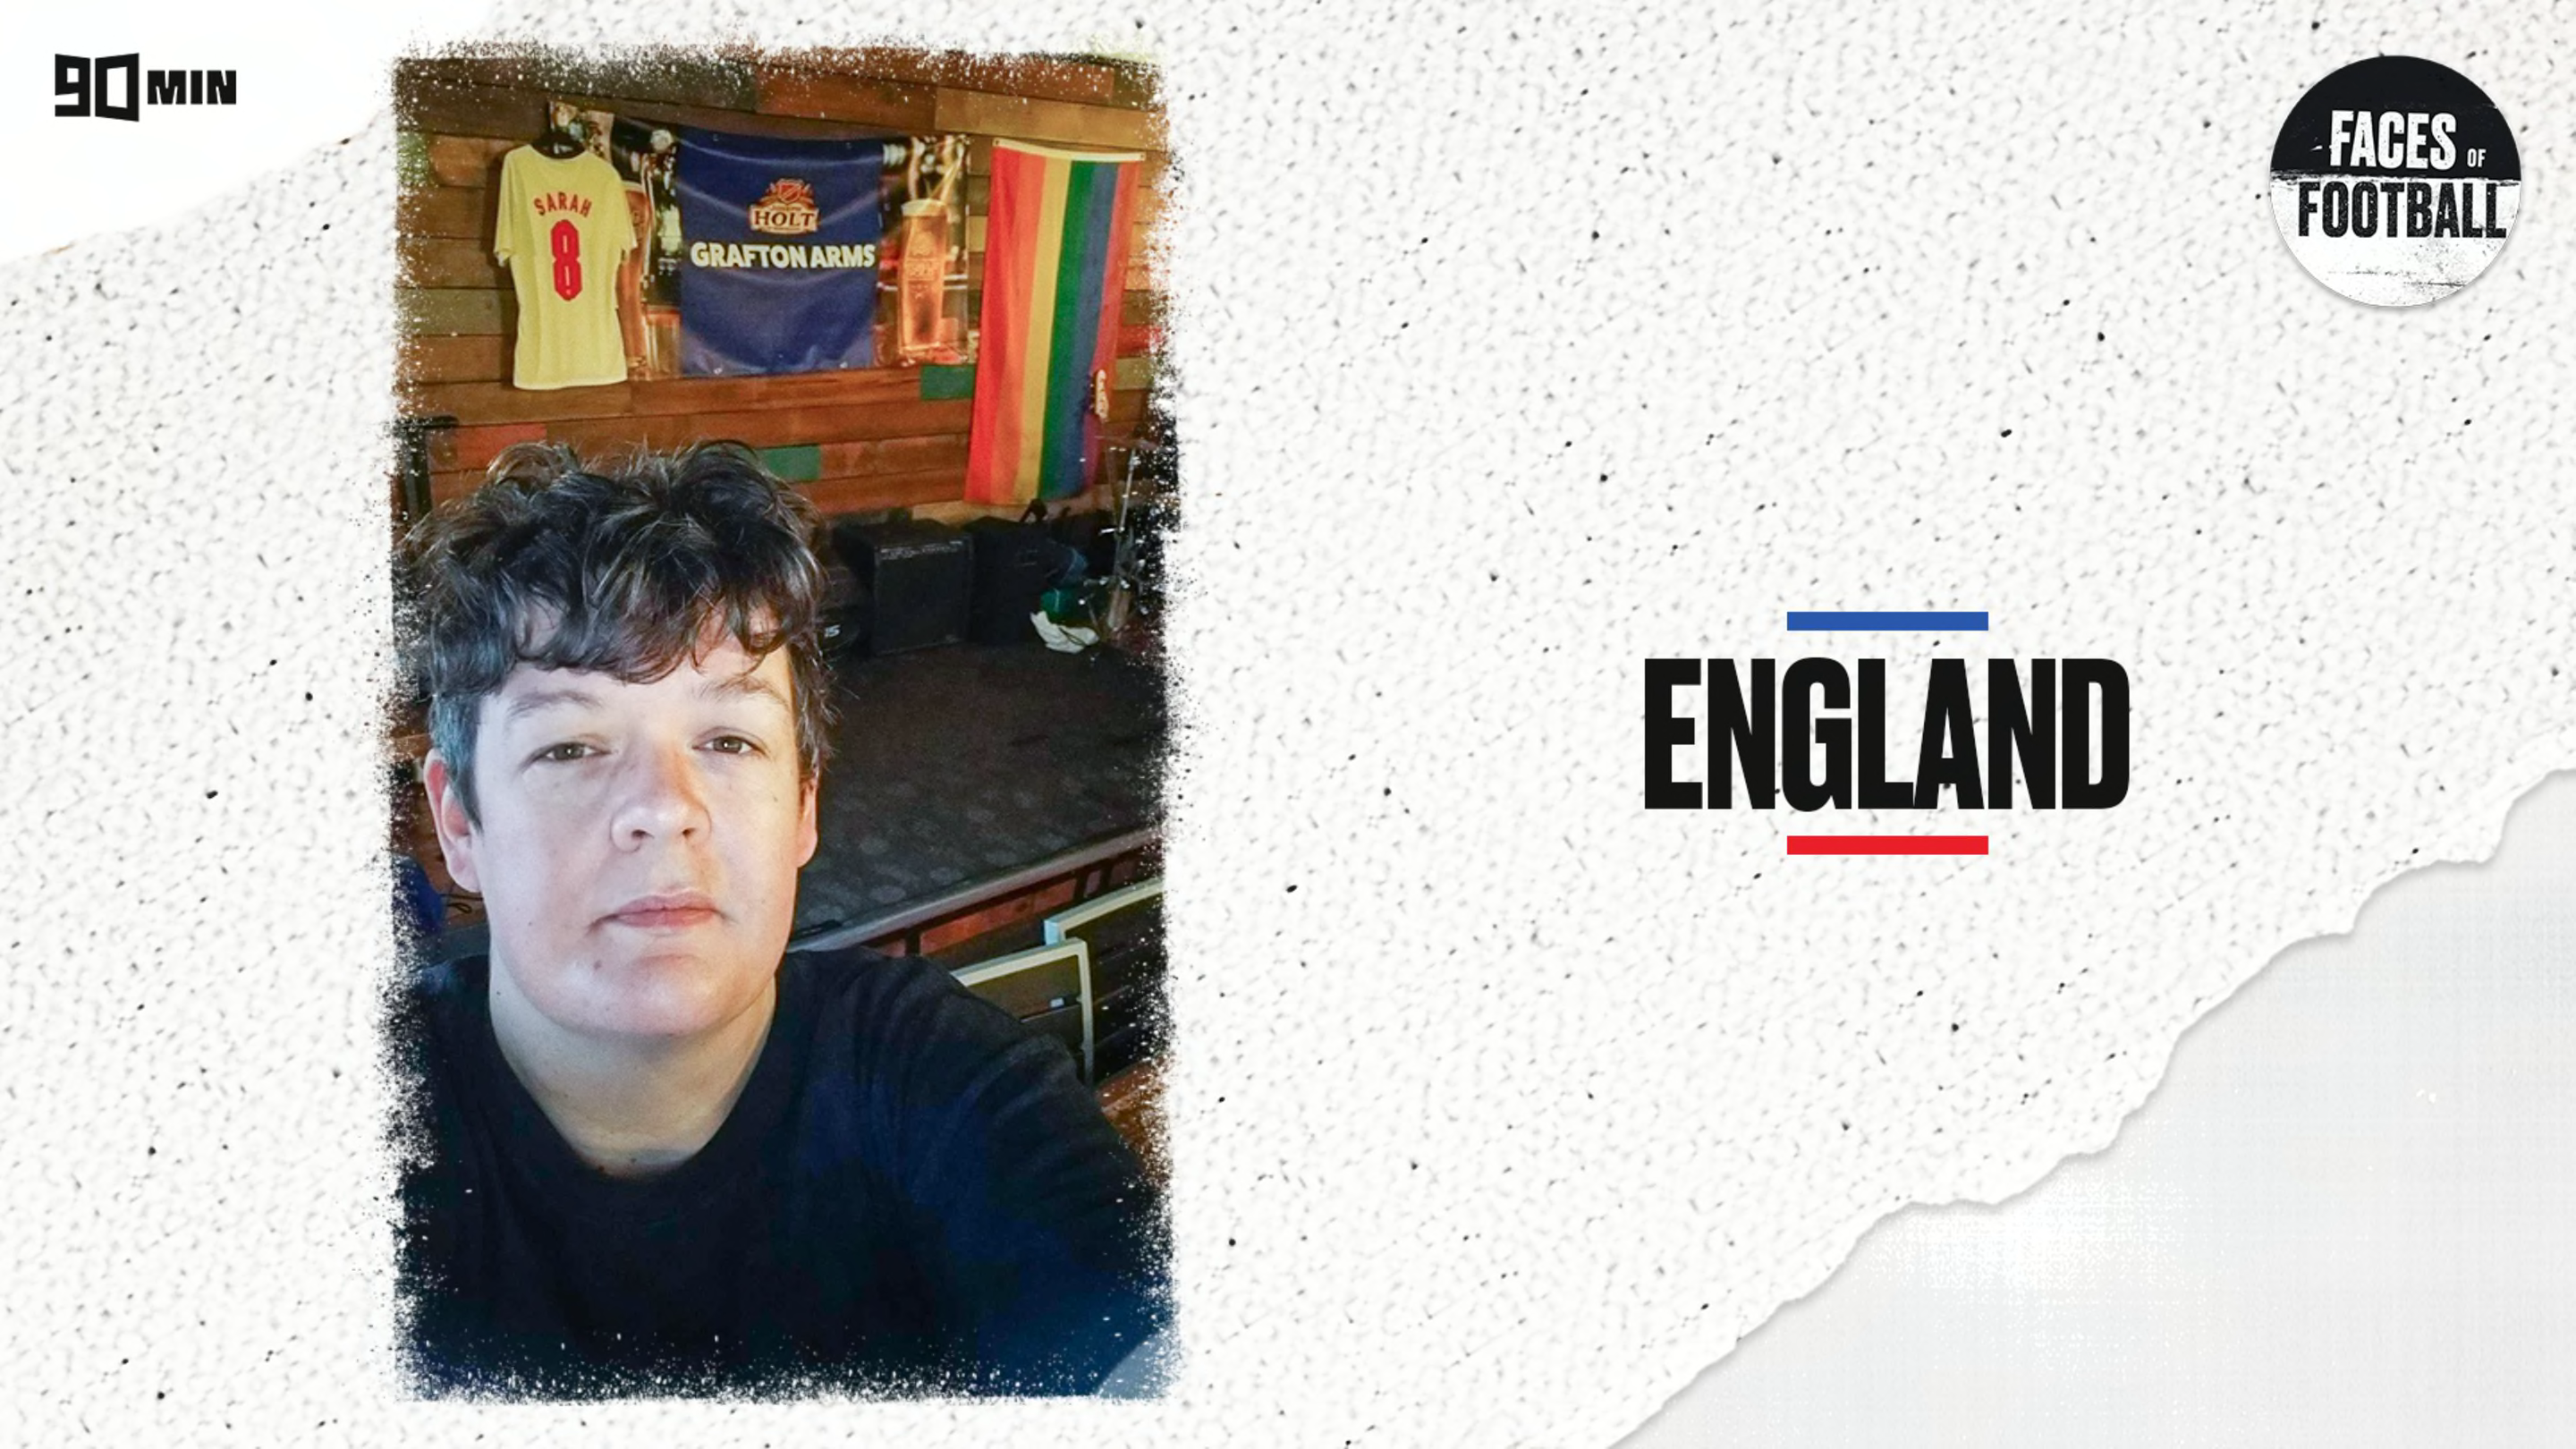 Faces of Football: England - a letter to the national team